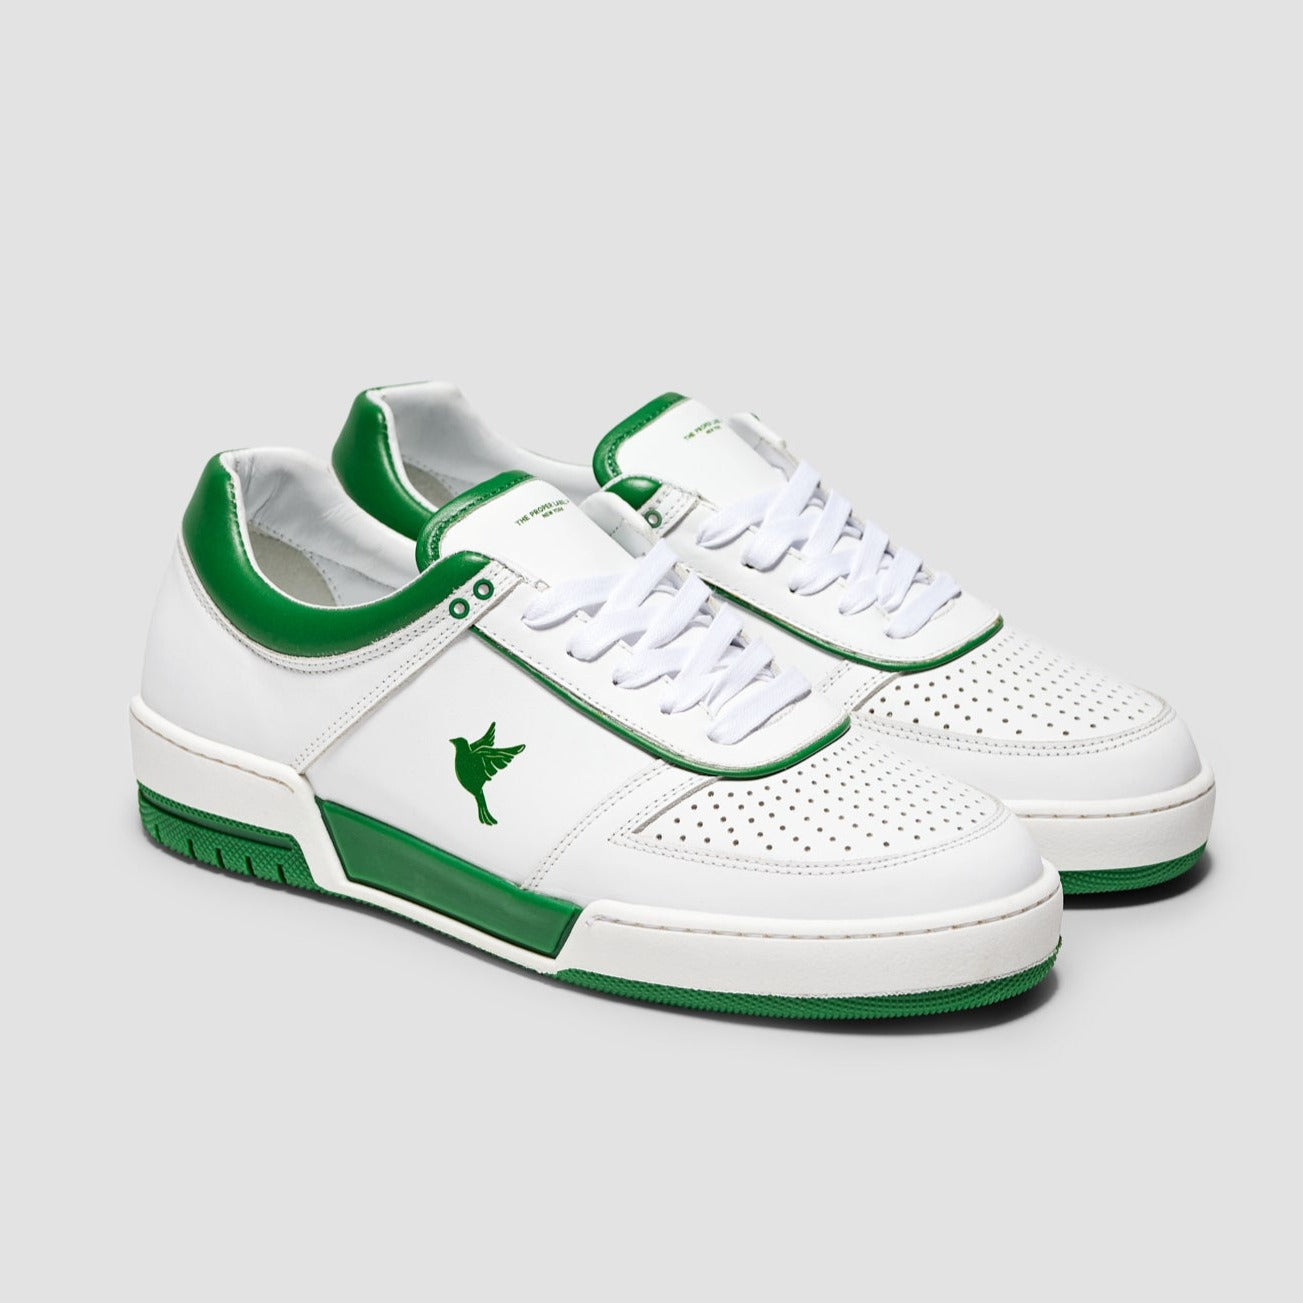 White sustainable sneakers with Renaissance Green accents, showcasing a 3D-printed dove emblem on the side.